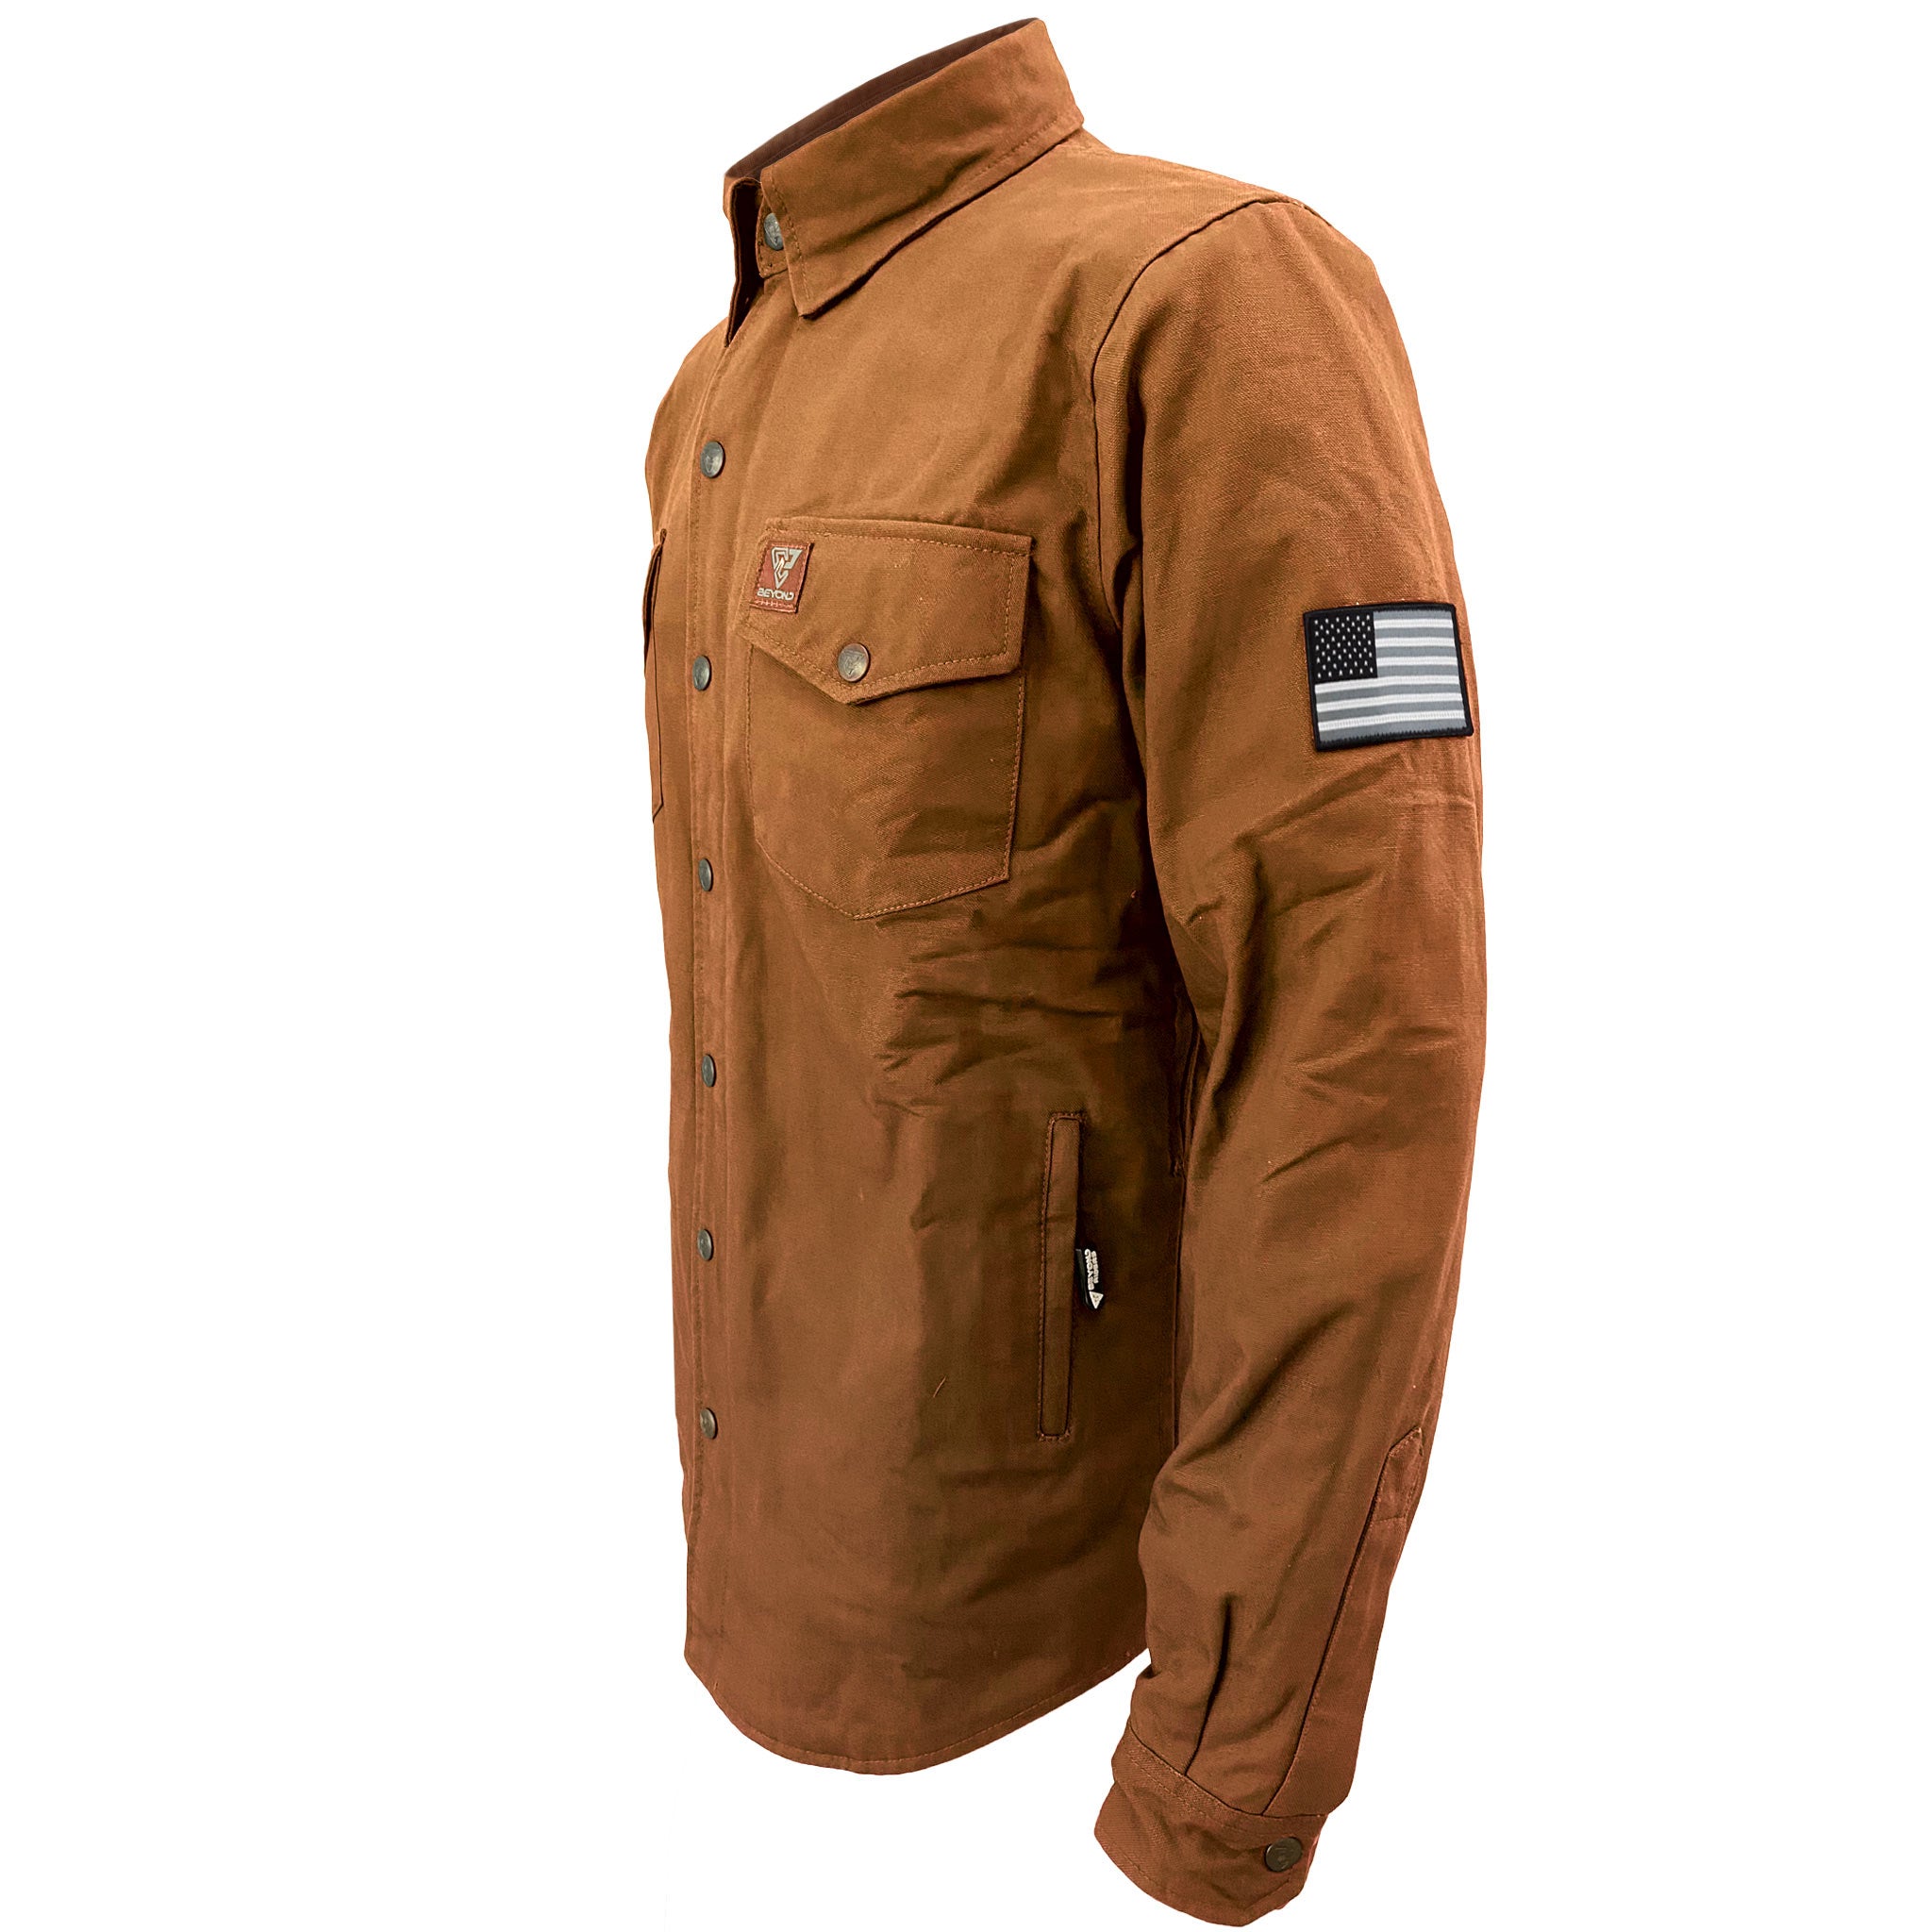 SALE Protective Canvas Jacket for Men - Light Brown with Pads